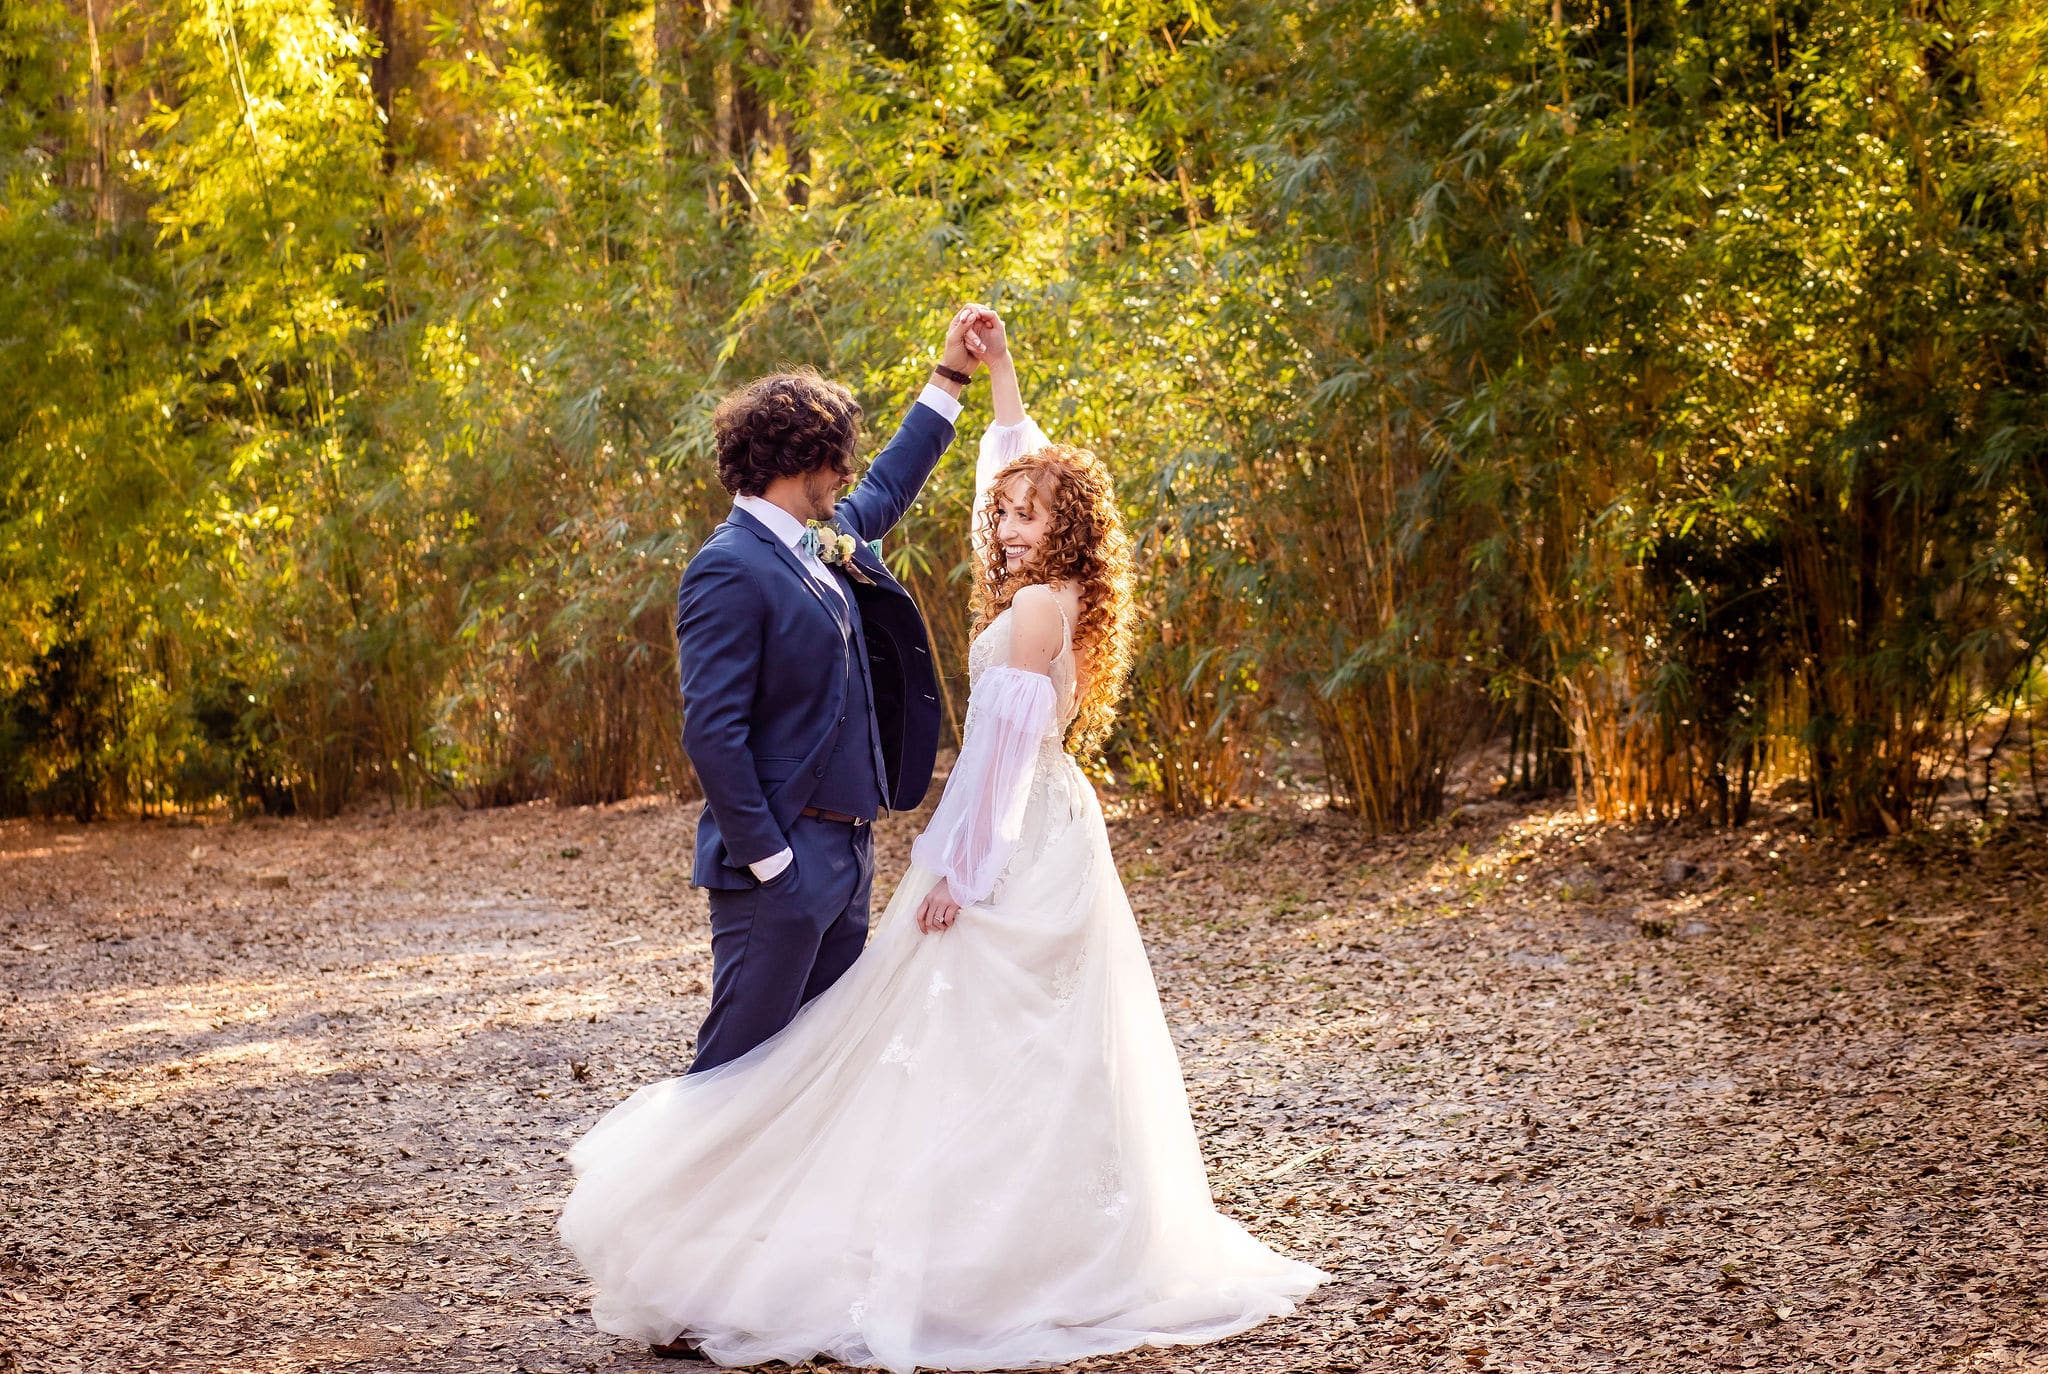 bride and groom outside surrounded by greenery with golden sunlight while groom spins bride around